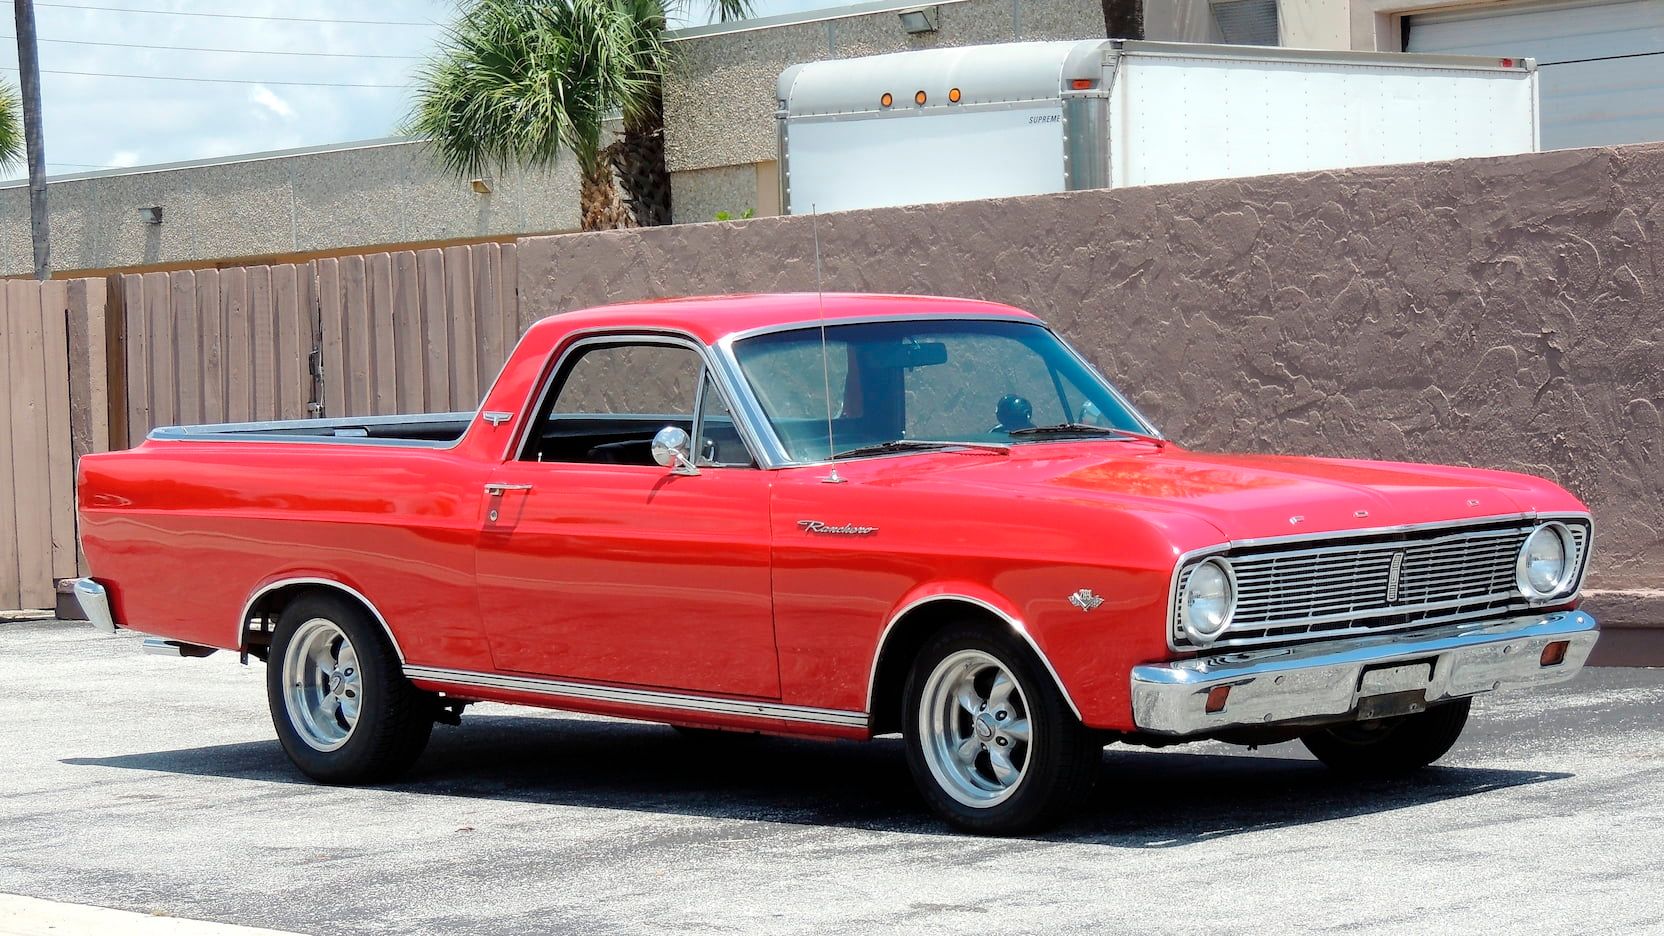 A parked 1966 Ford Ranchero